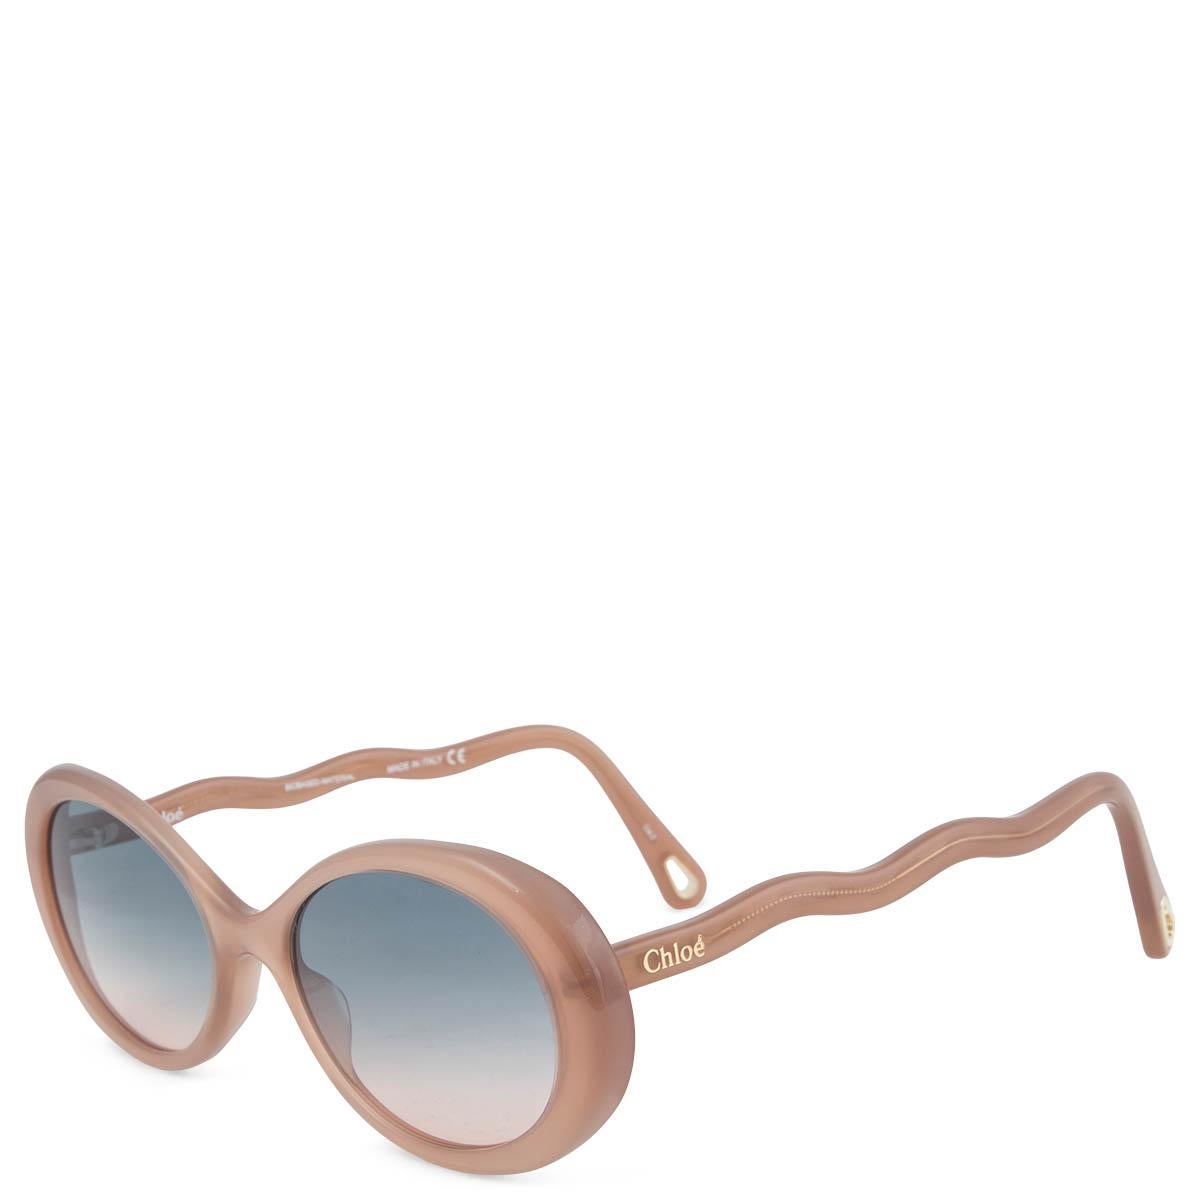 100% authentic Chloé CH0088S oval sunglasses in nude acetate and light grey gradient lenses. Have been worn and are in excellent condition. Come with case. 

Measurements
Model	CH0088S 
Width	15cm (5.9in)
Height	4.5cm (1.8in)

All our listings